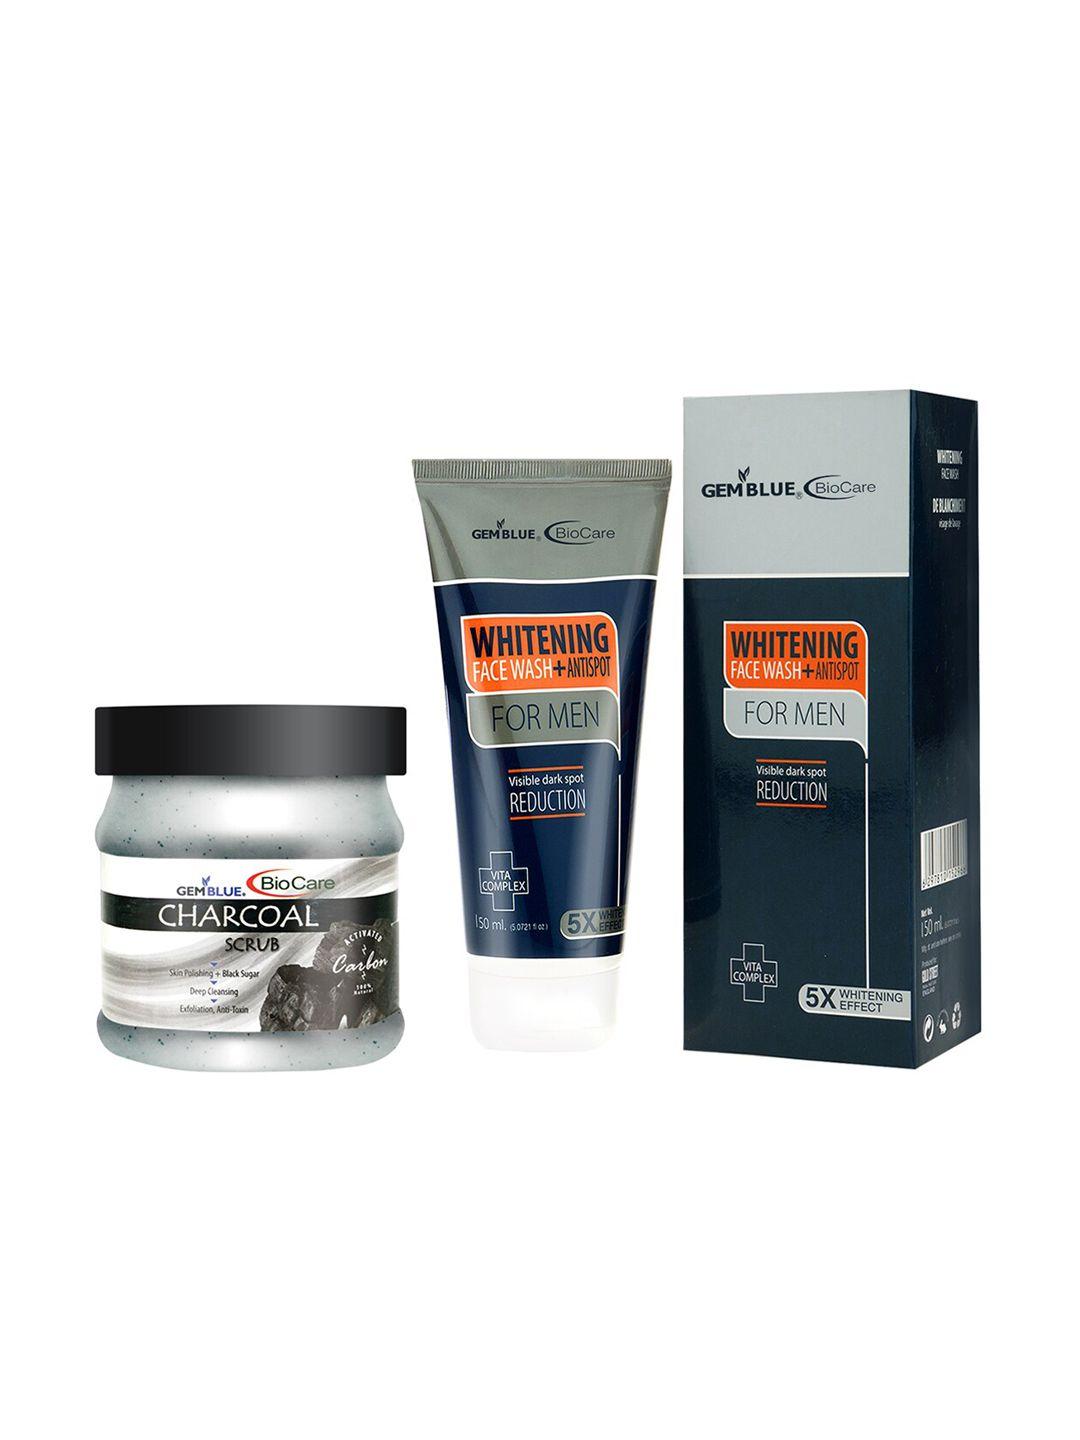 gemblue biocare unisex charcoal scrub, 500ml and whitening face wash,150ml